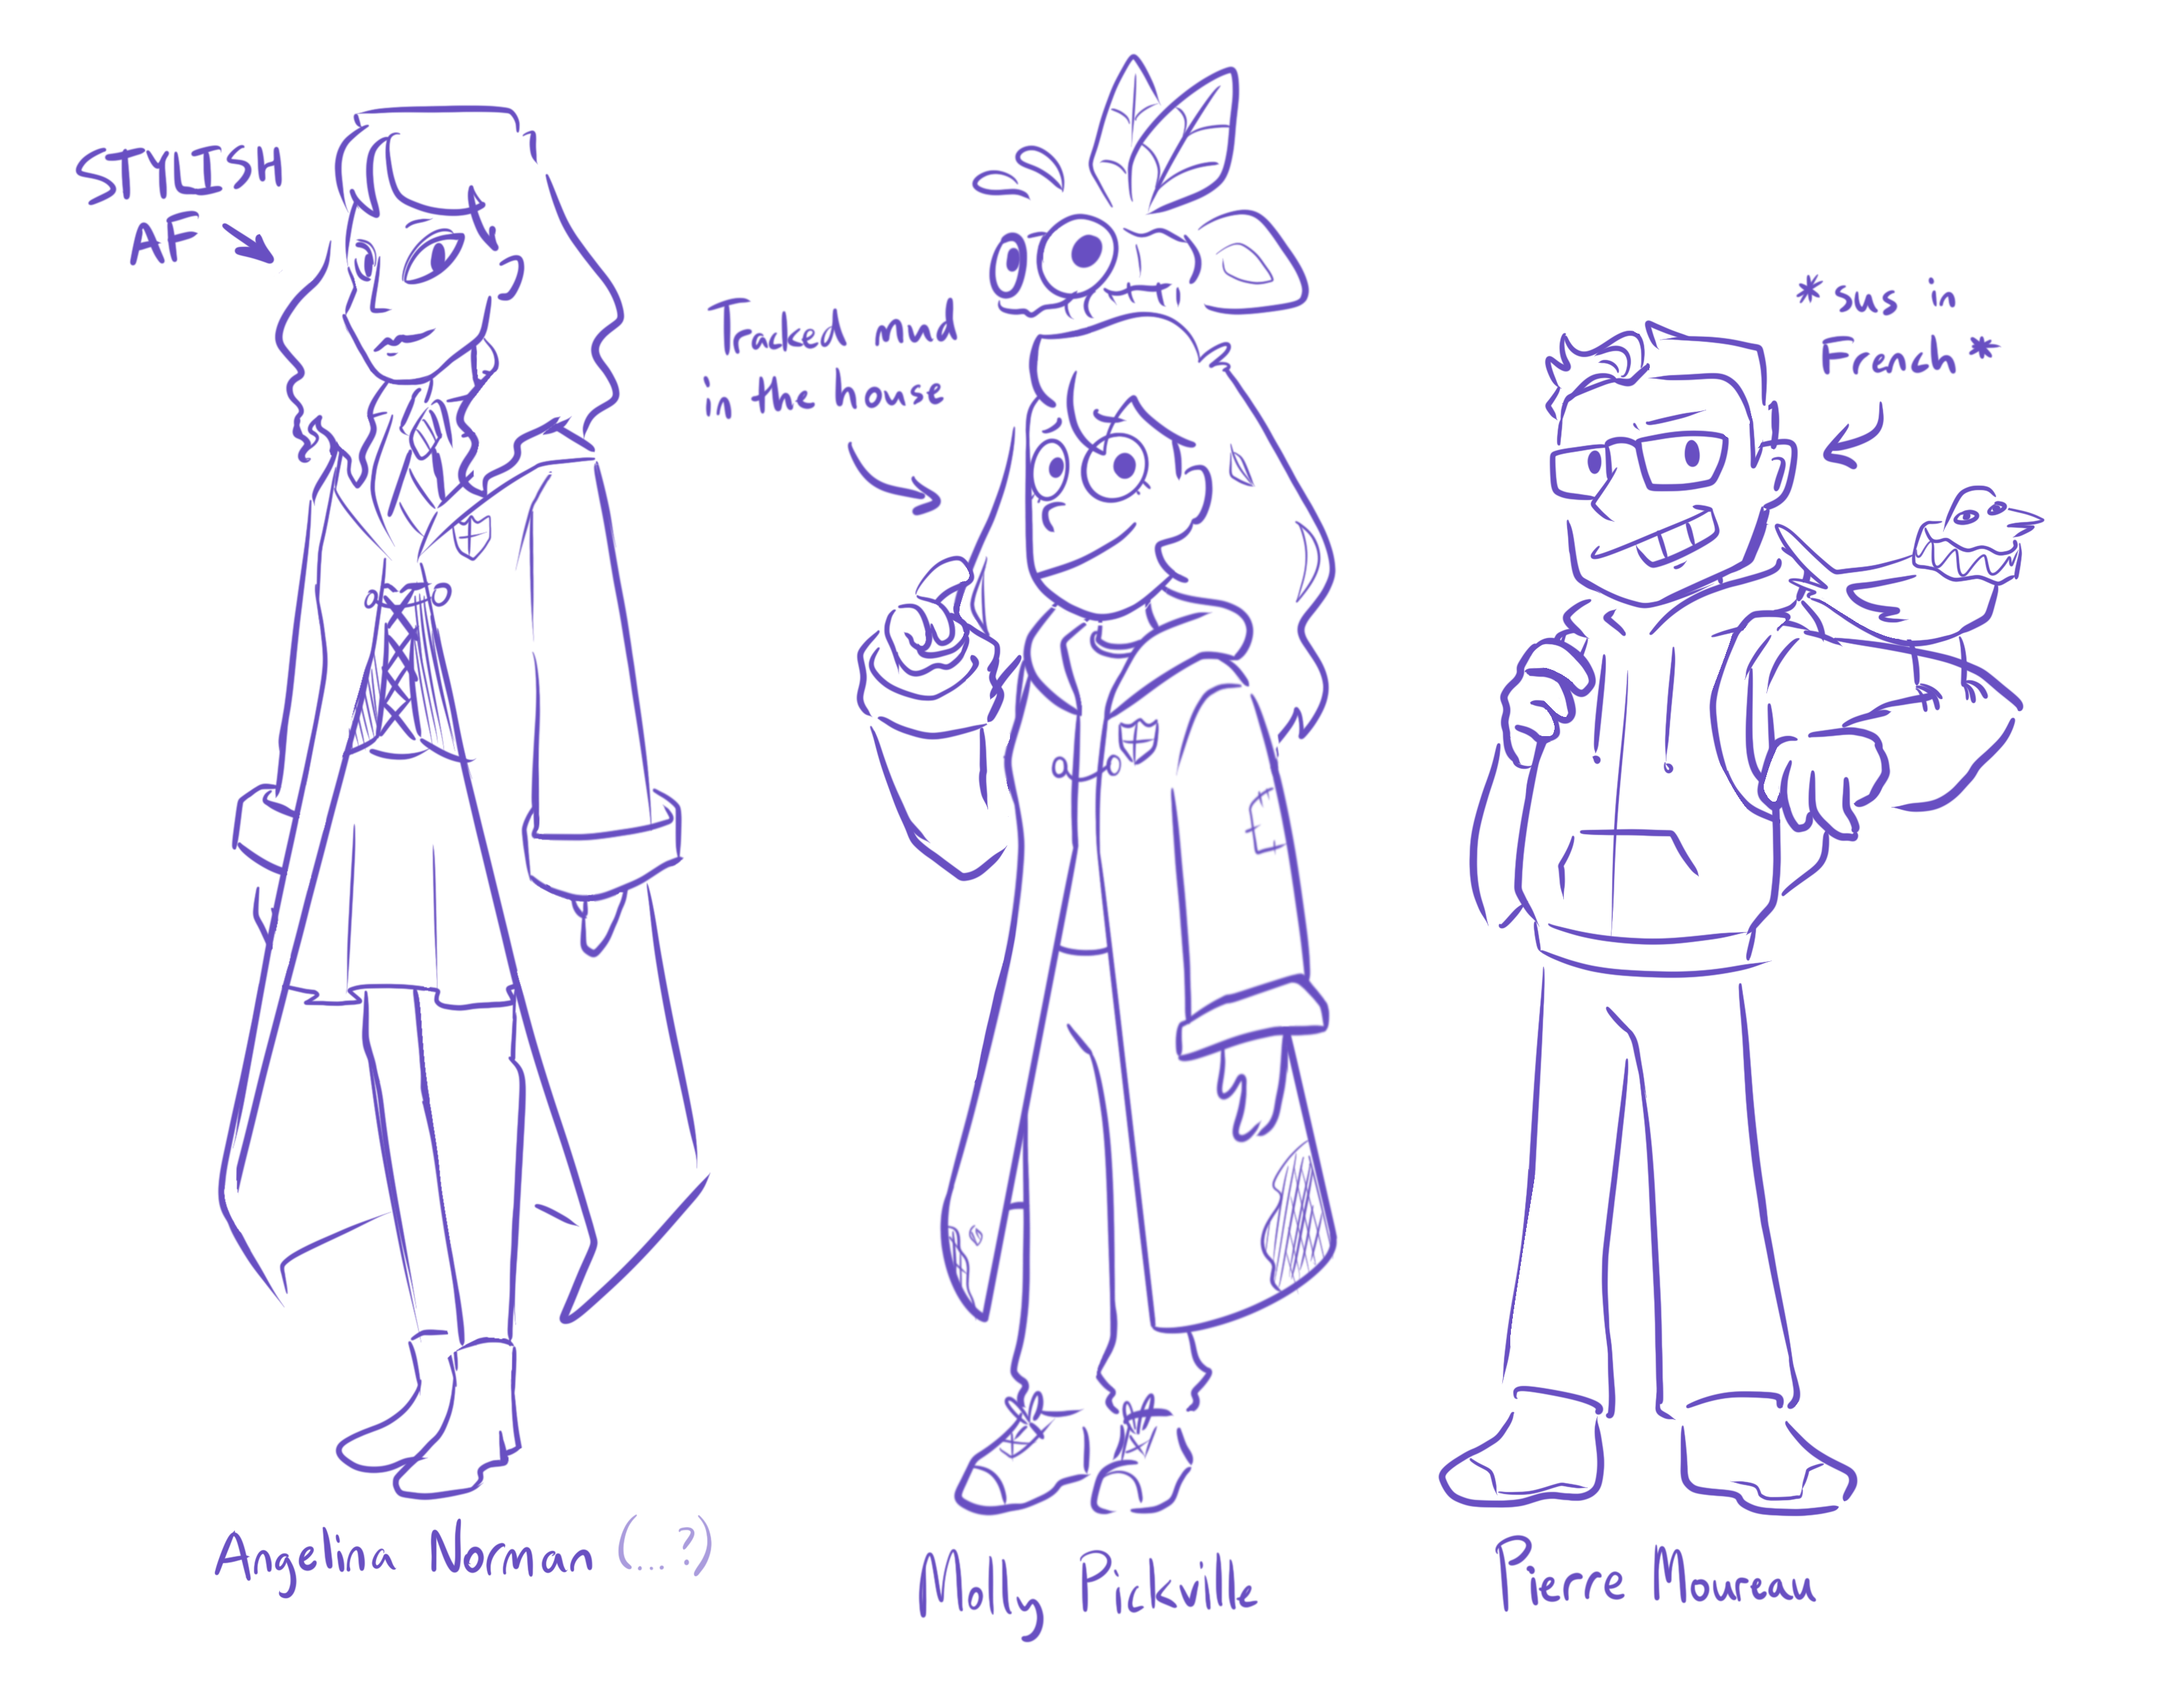 character sketches of angelina norman, mollly pickville, and pierre moreau